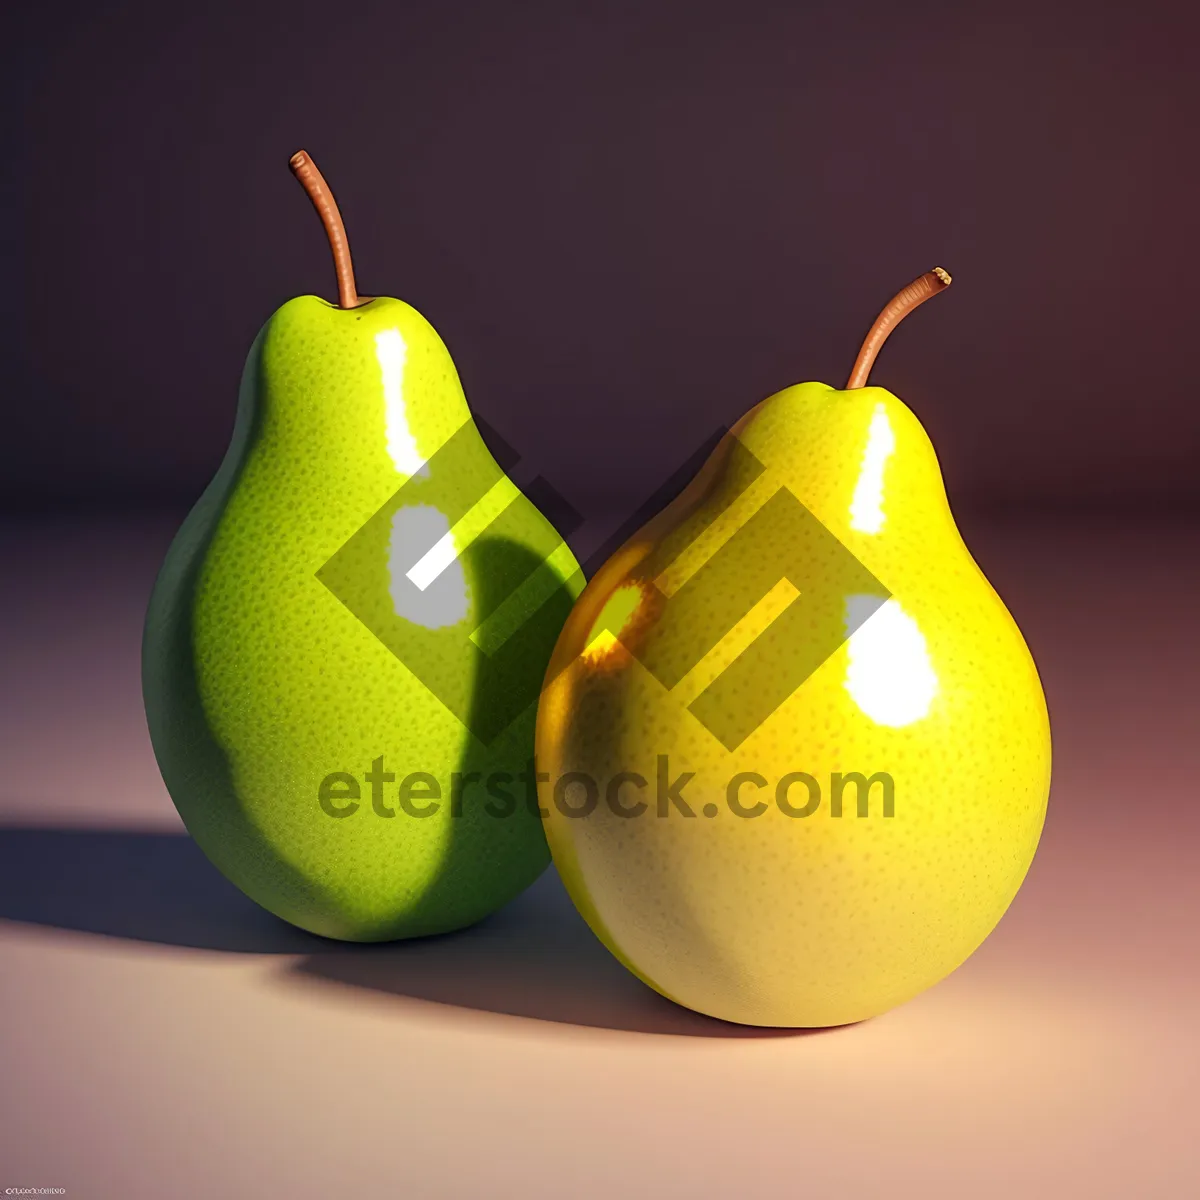 Picture of Fresh and Juicy Citrus Pear - Nutrient-packed Edible Delight